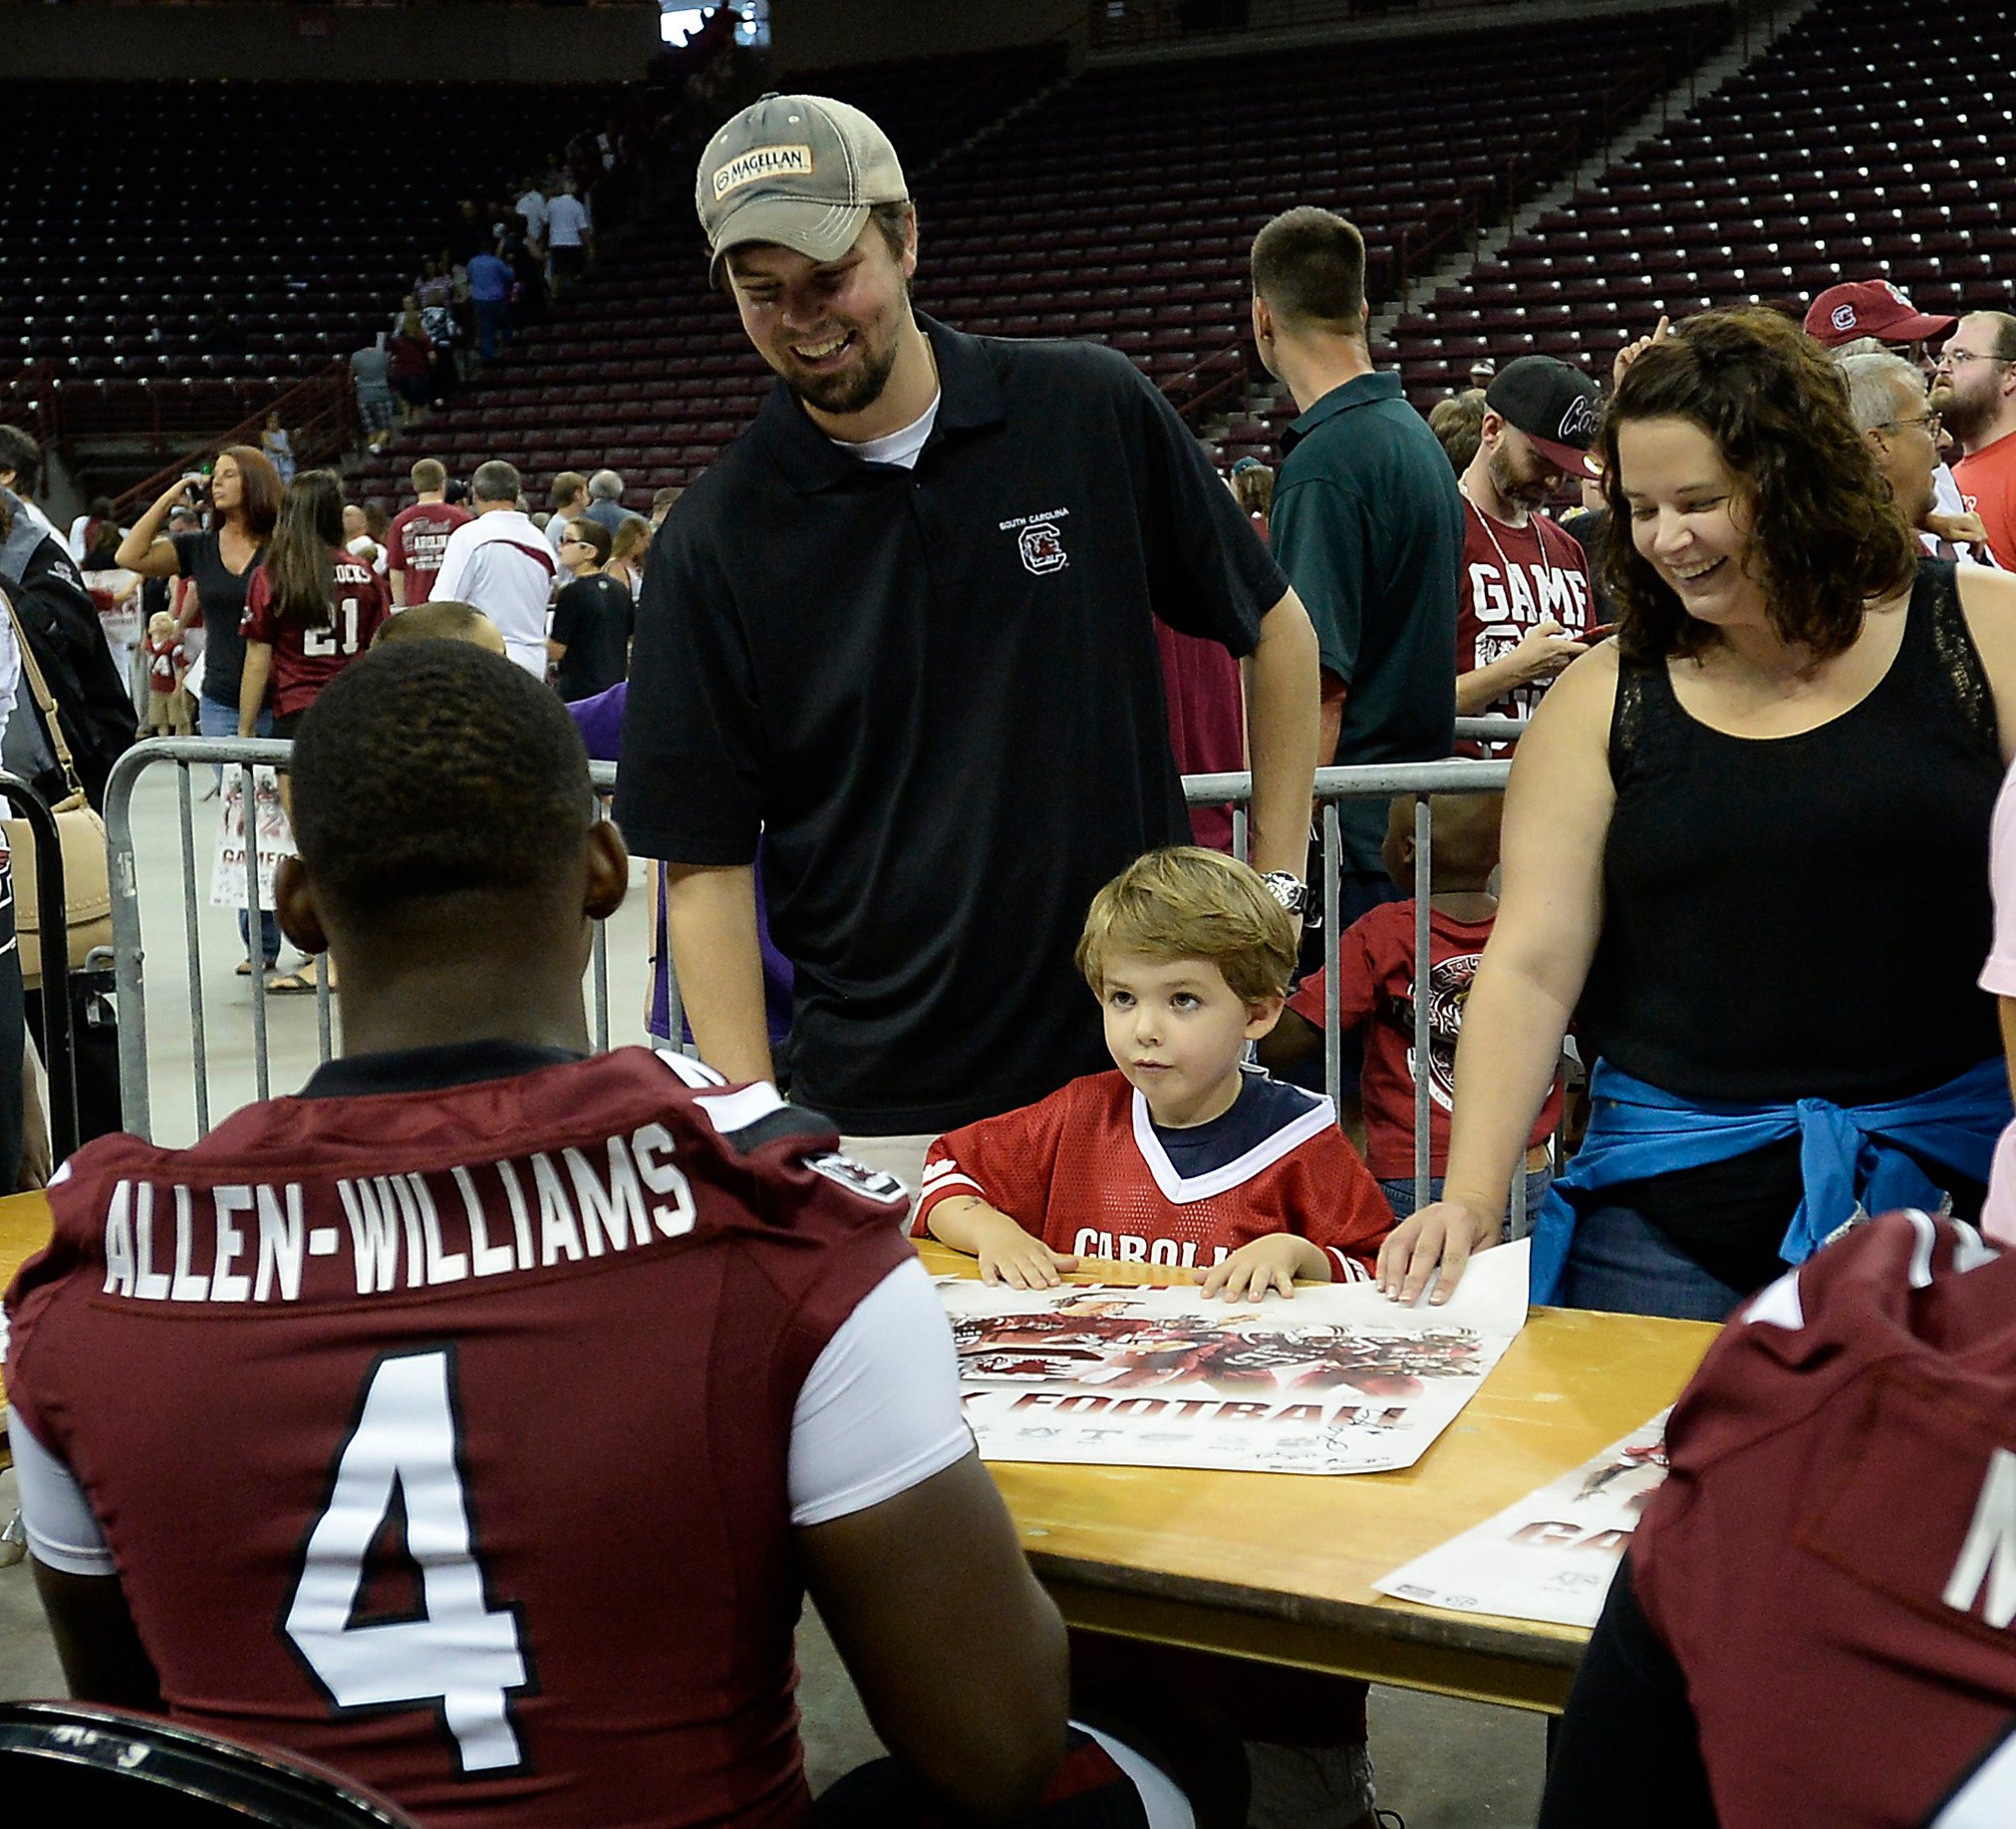 Colonial Life Fan Appreciation Day Set for Sunday, August 16